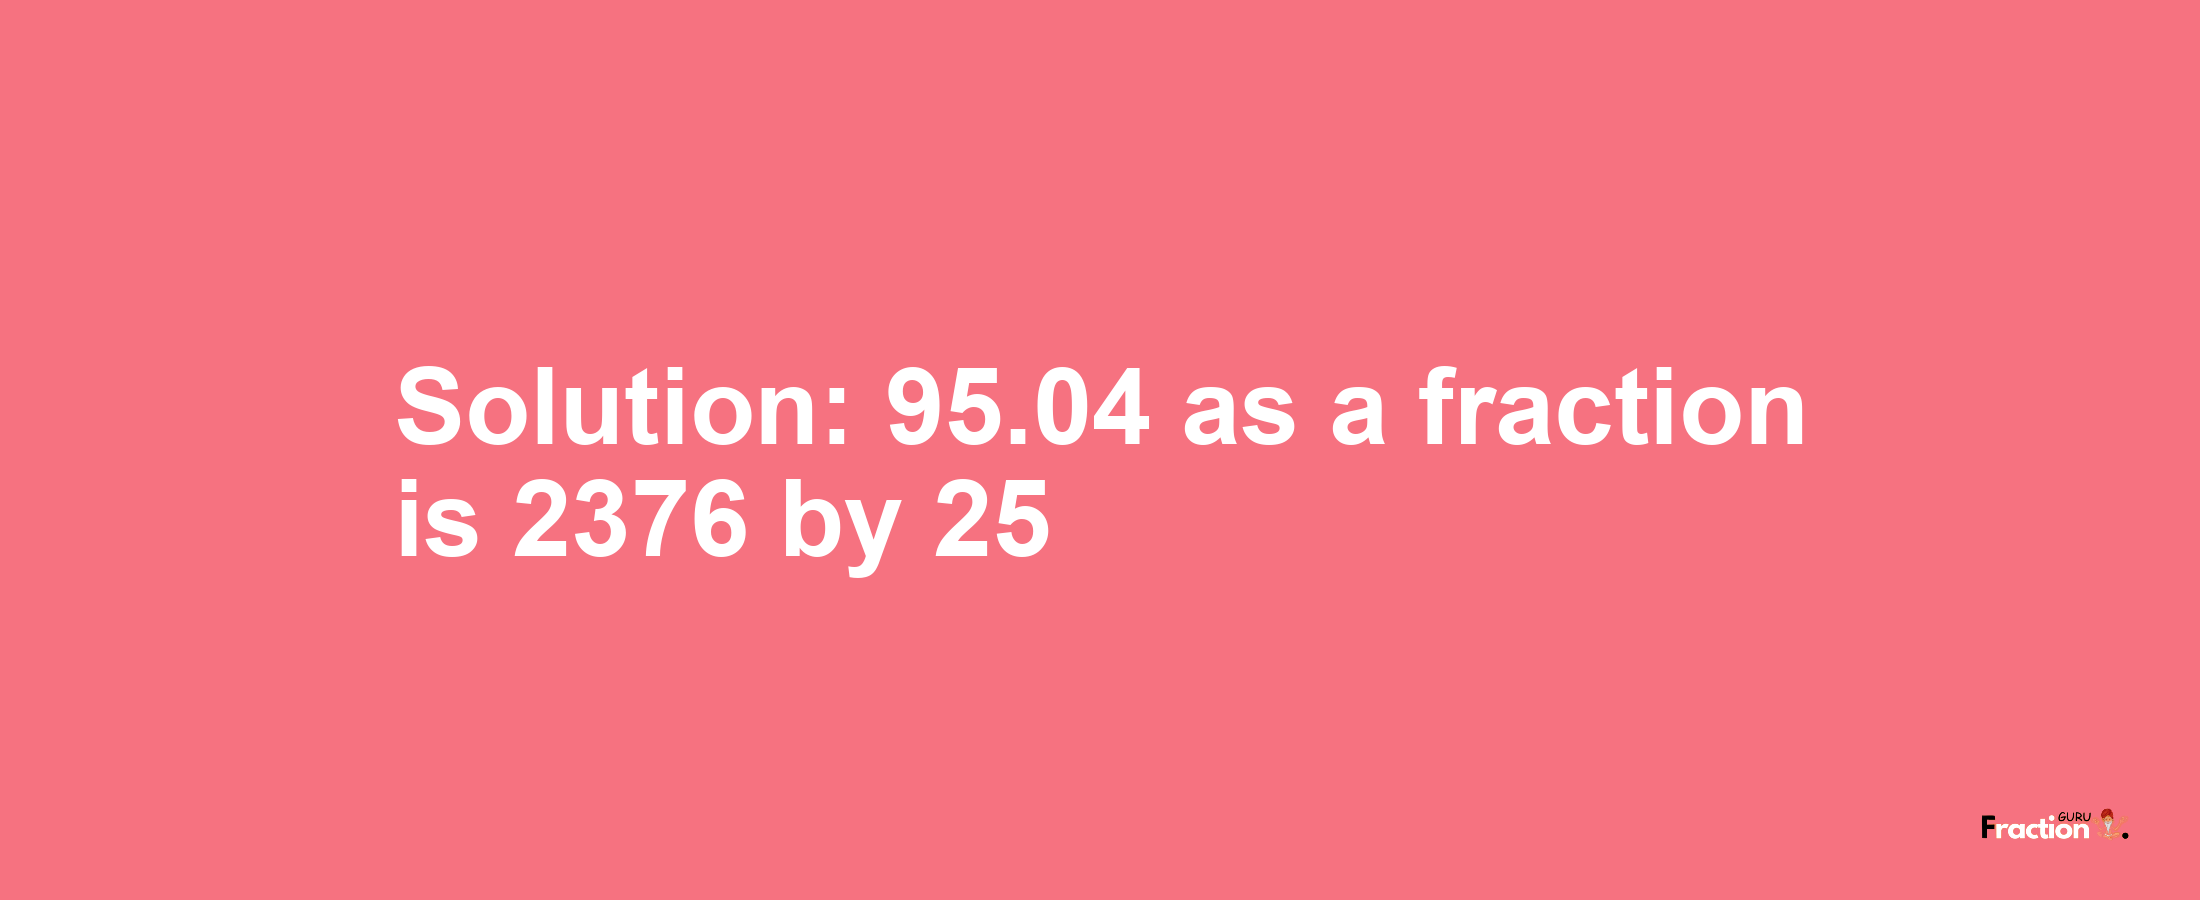 Solution:95.04 as a fraction is 2376/25